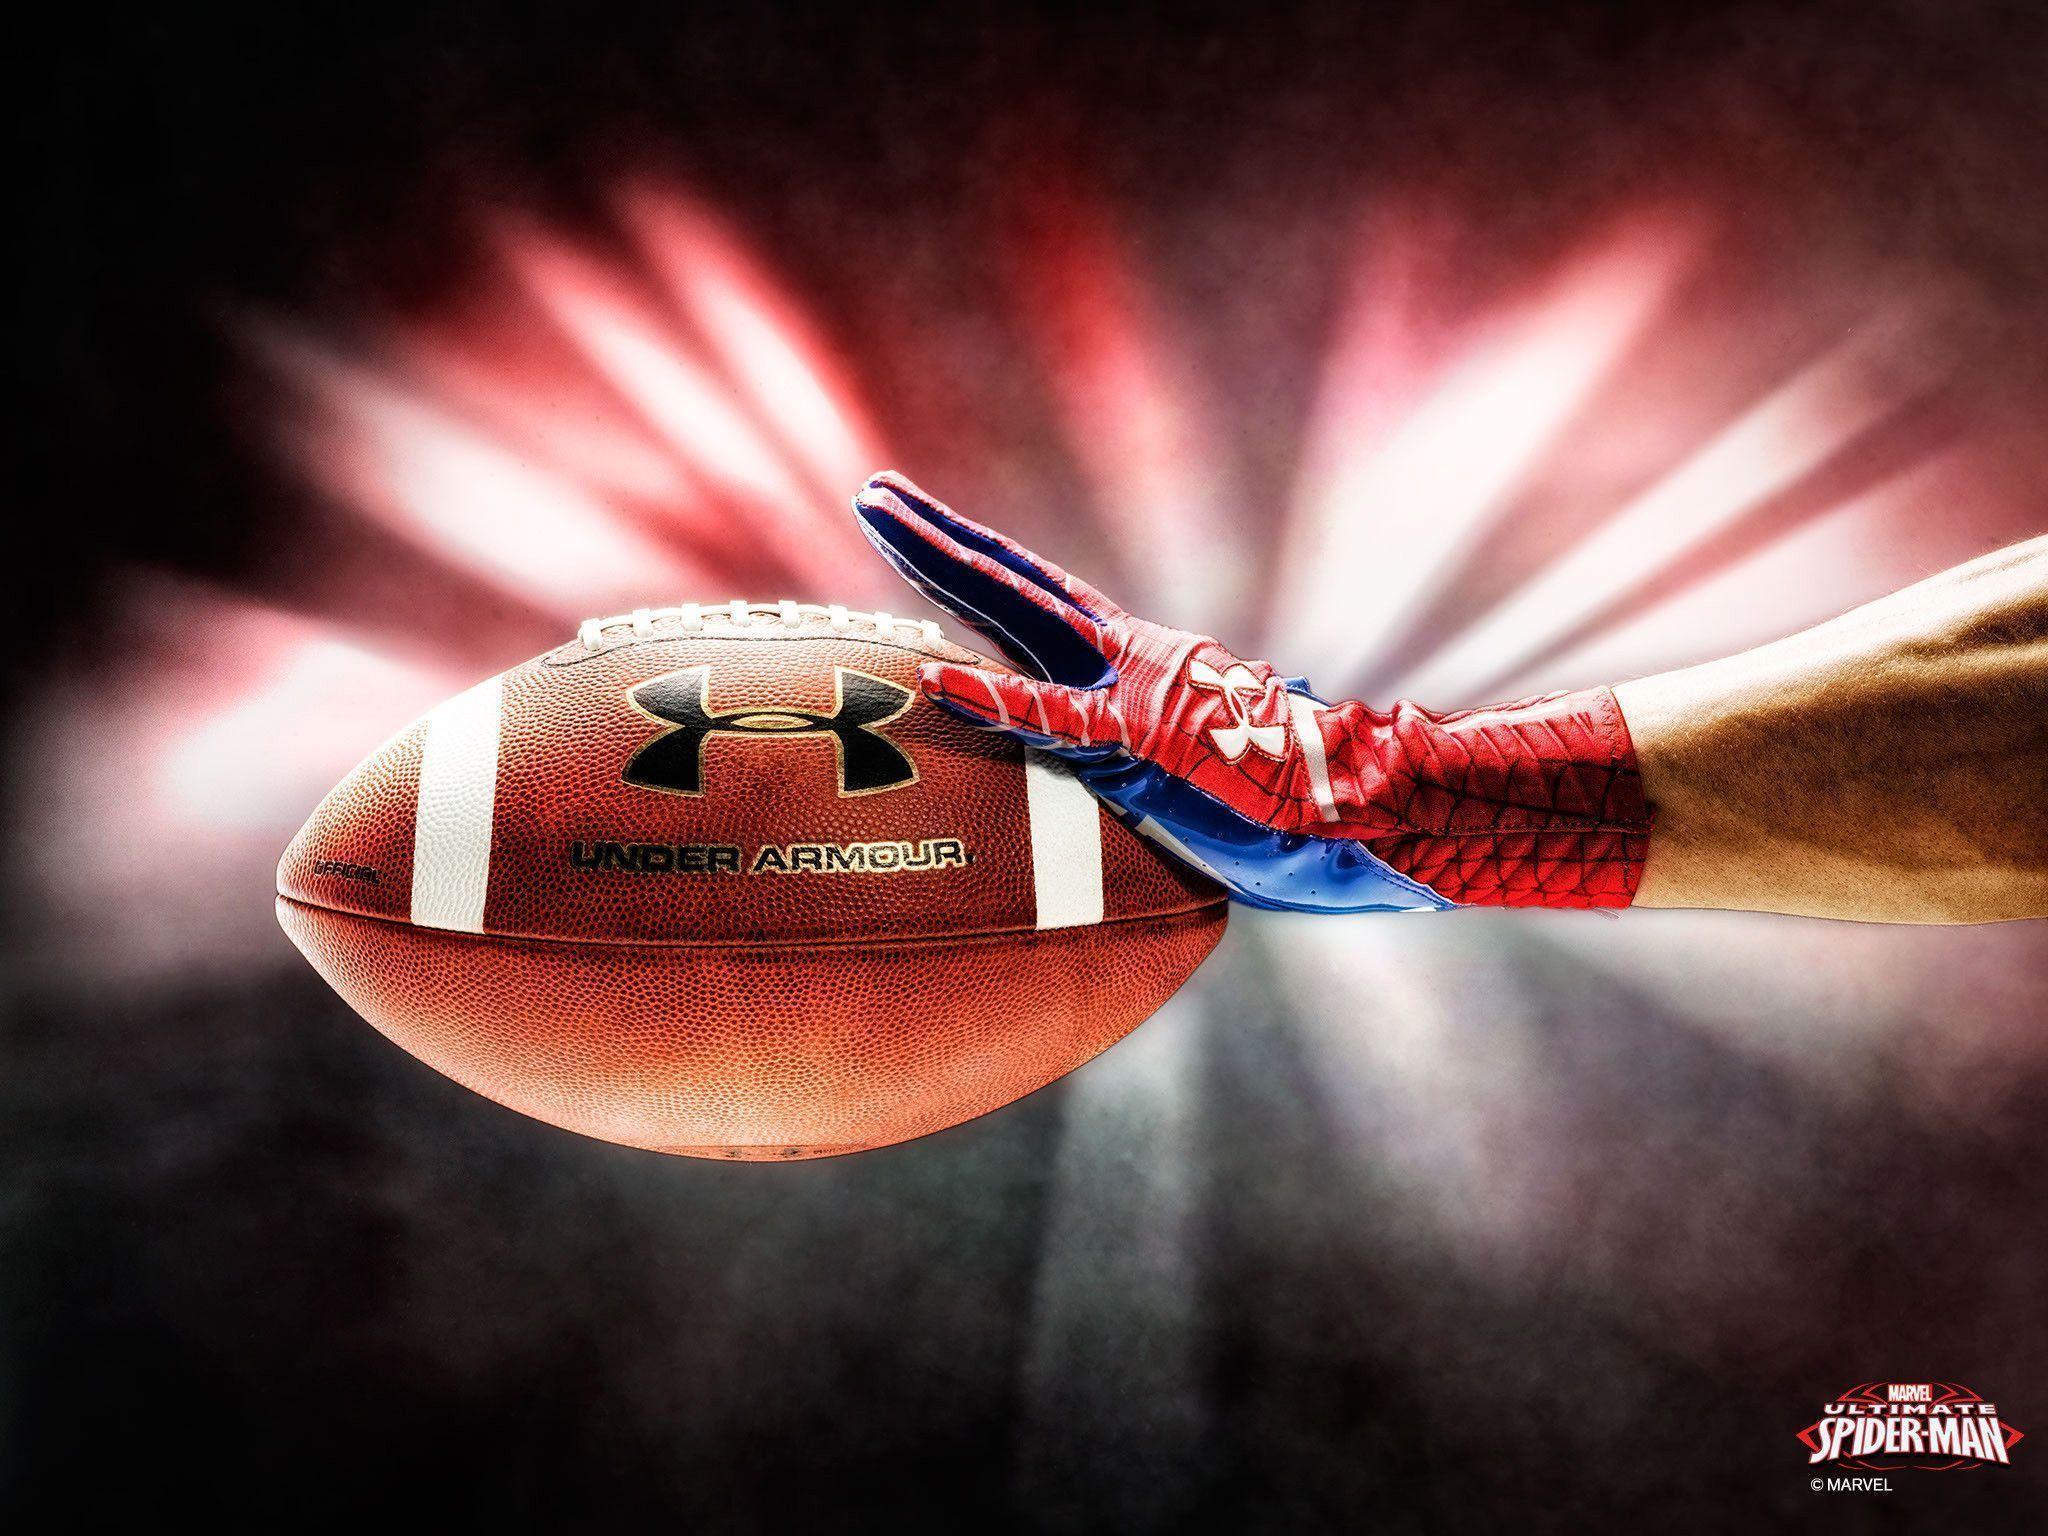 image For > Under Armour Football Wallpaper HD